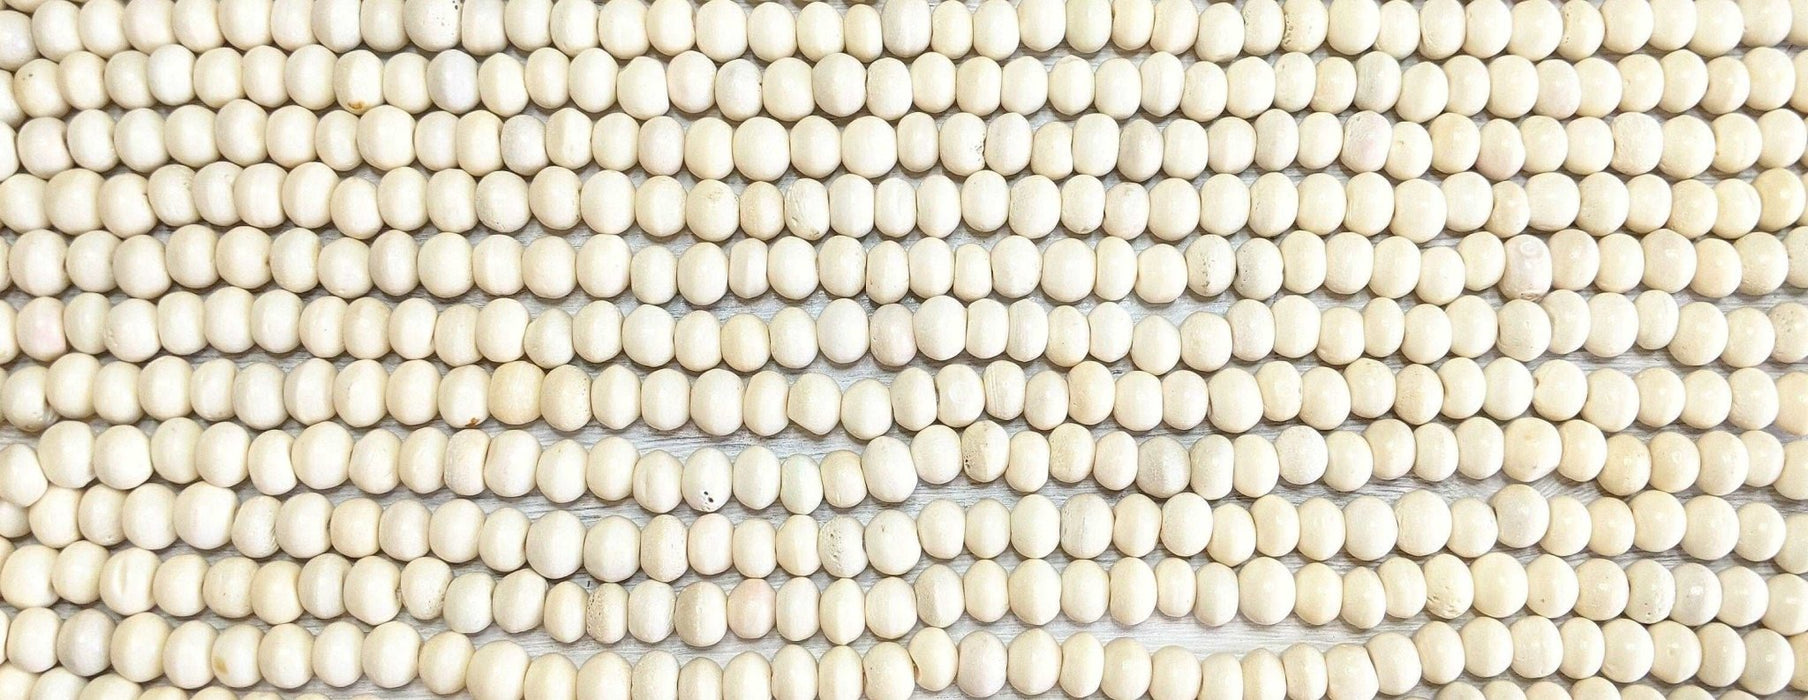 10x8mm Off White Water Buffalo Bone Rondelle Beads - 15 Inch Stand (AW25) - Beads and Babble